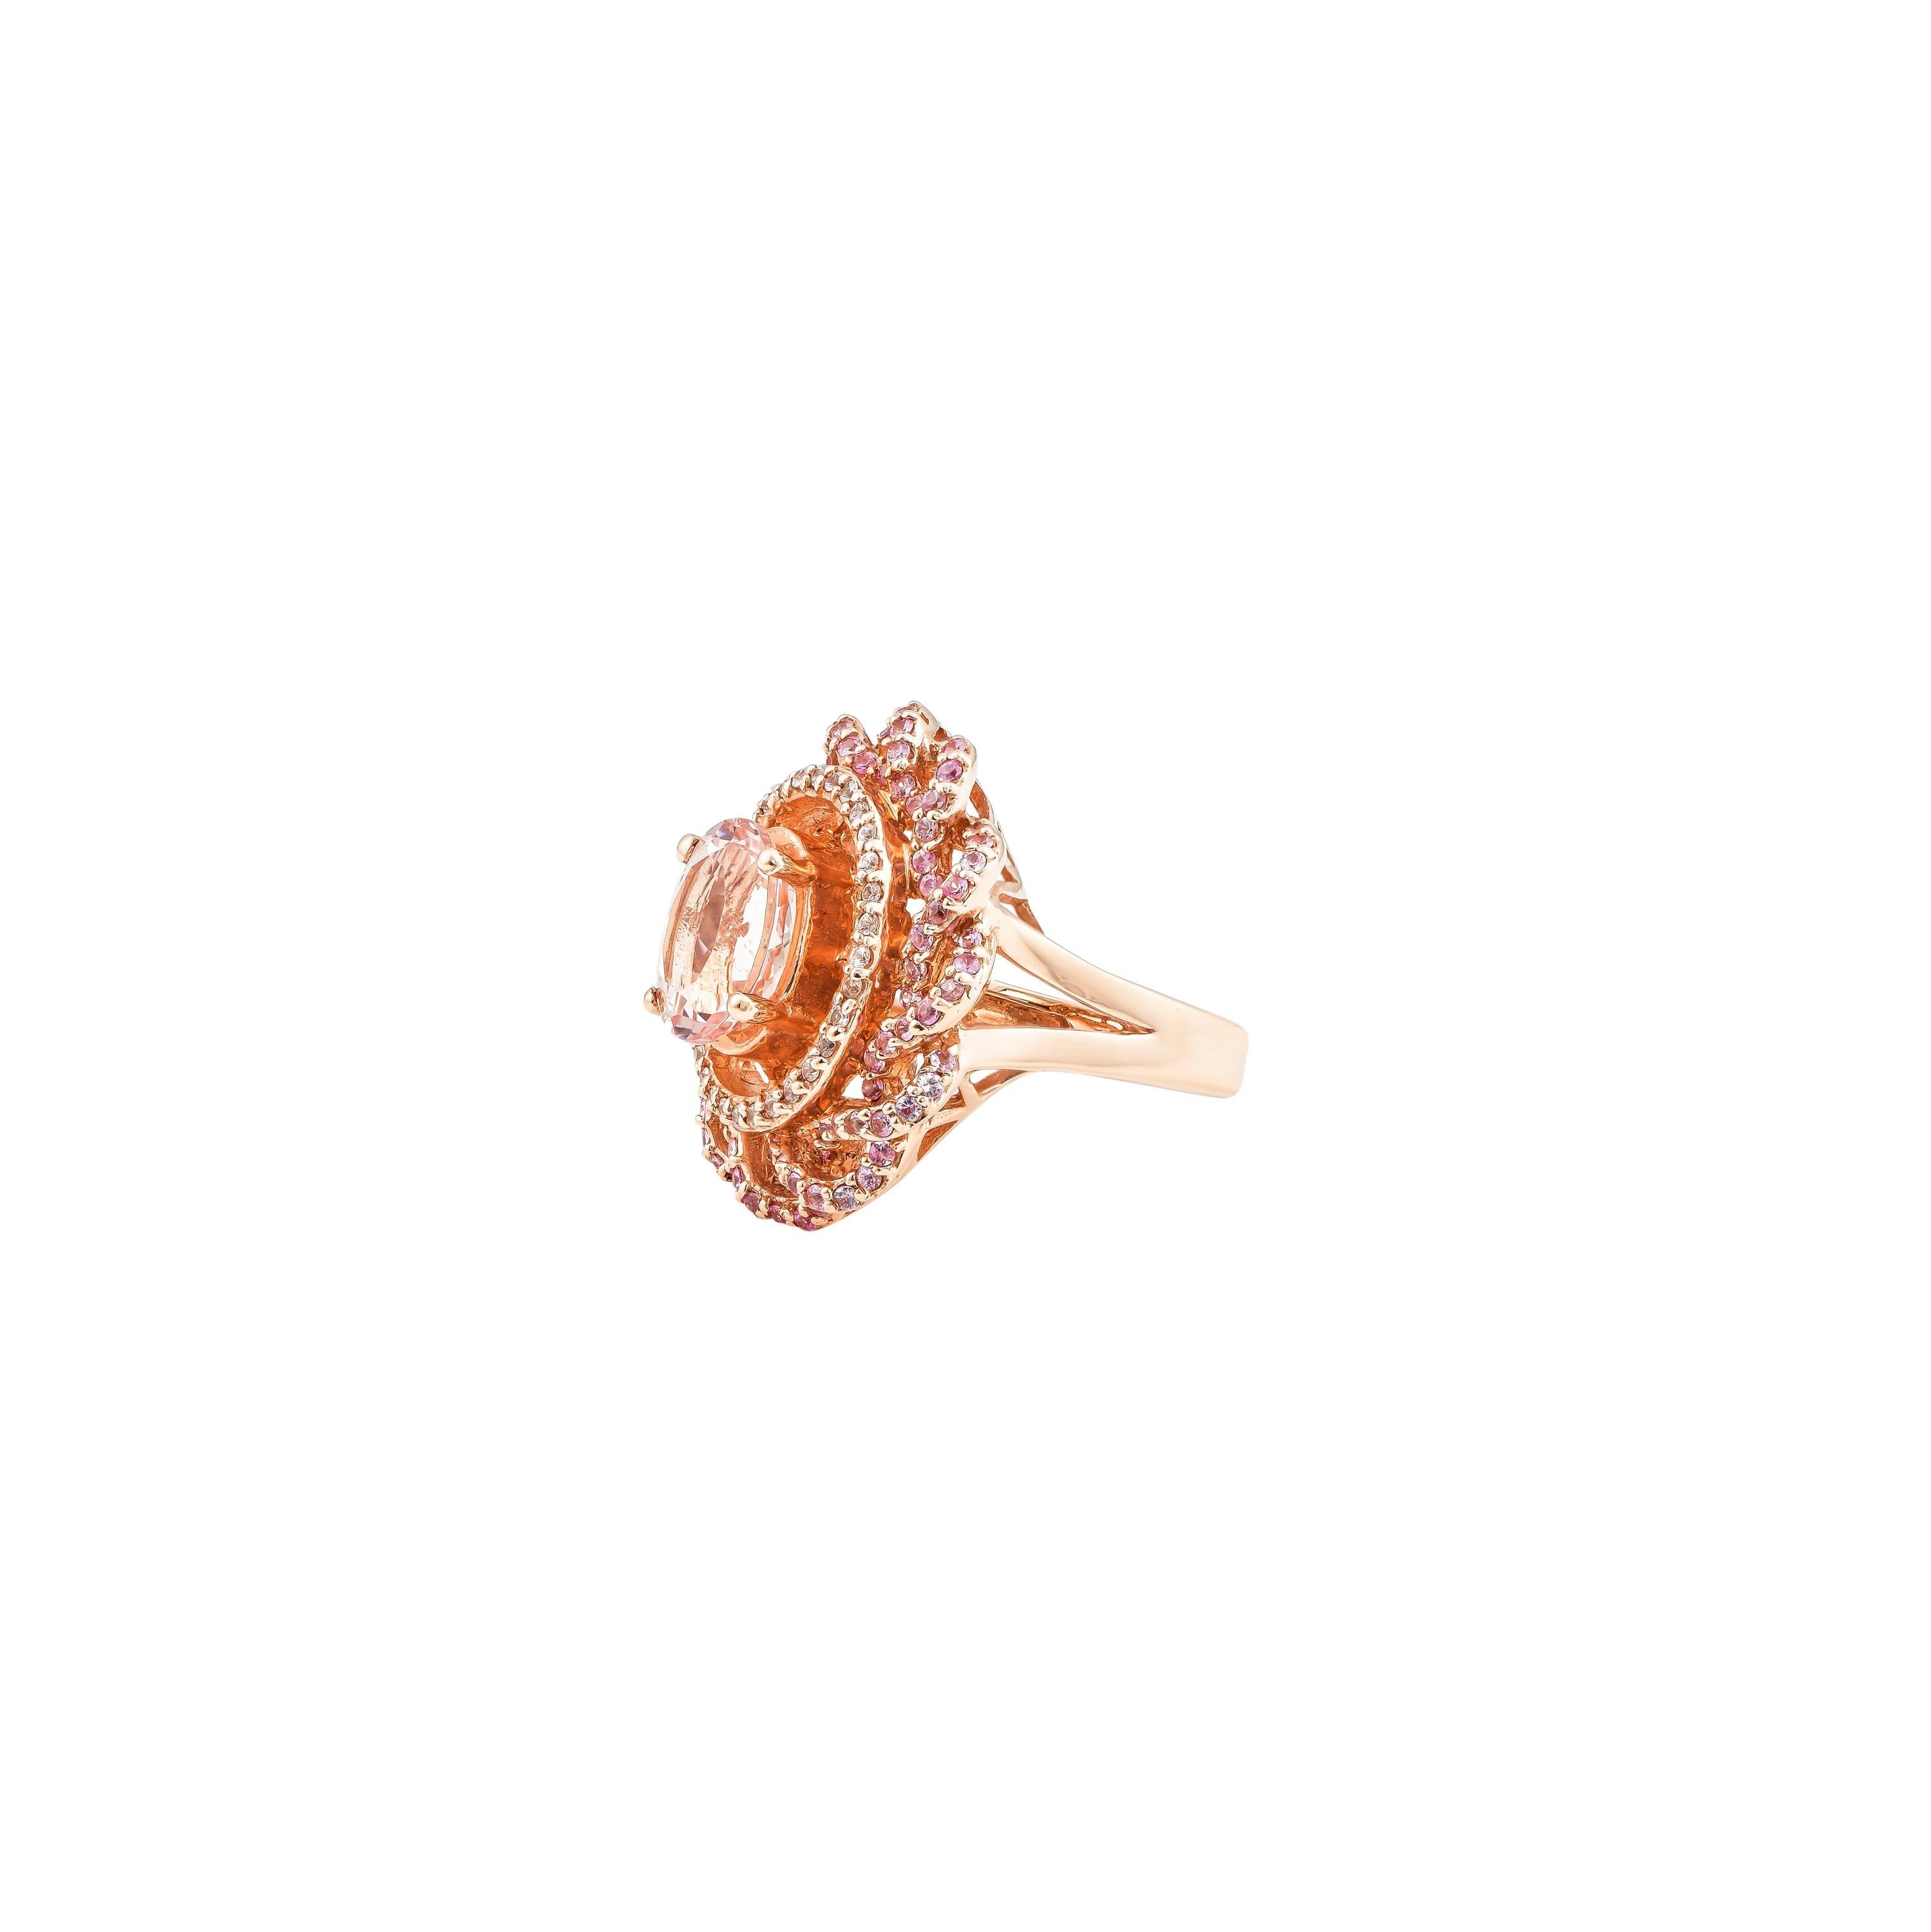 Contemporary 3.1 Carat Morganite and Diamond Ring in 18 Karat Rose Gold For Sale